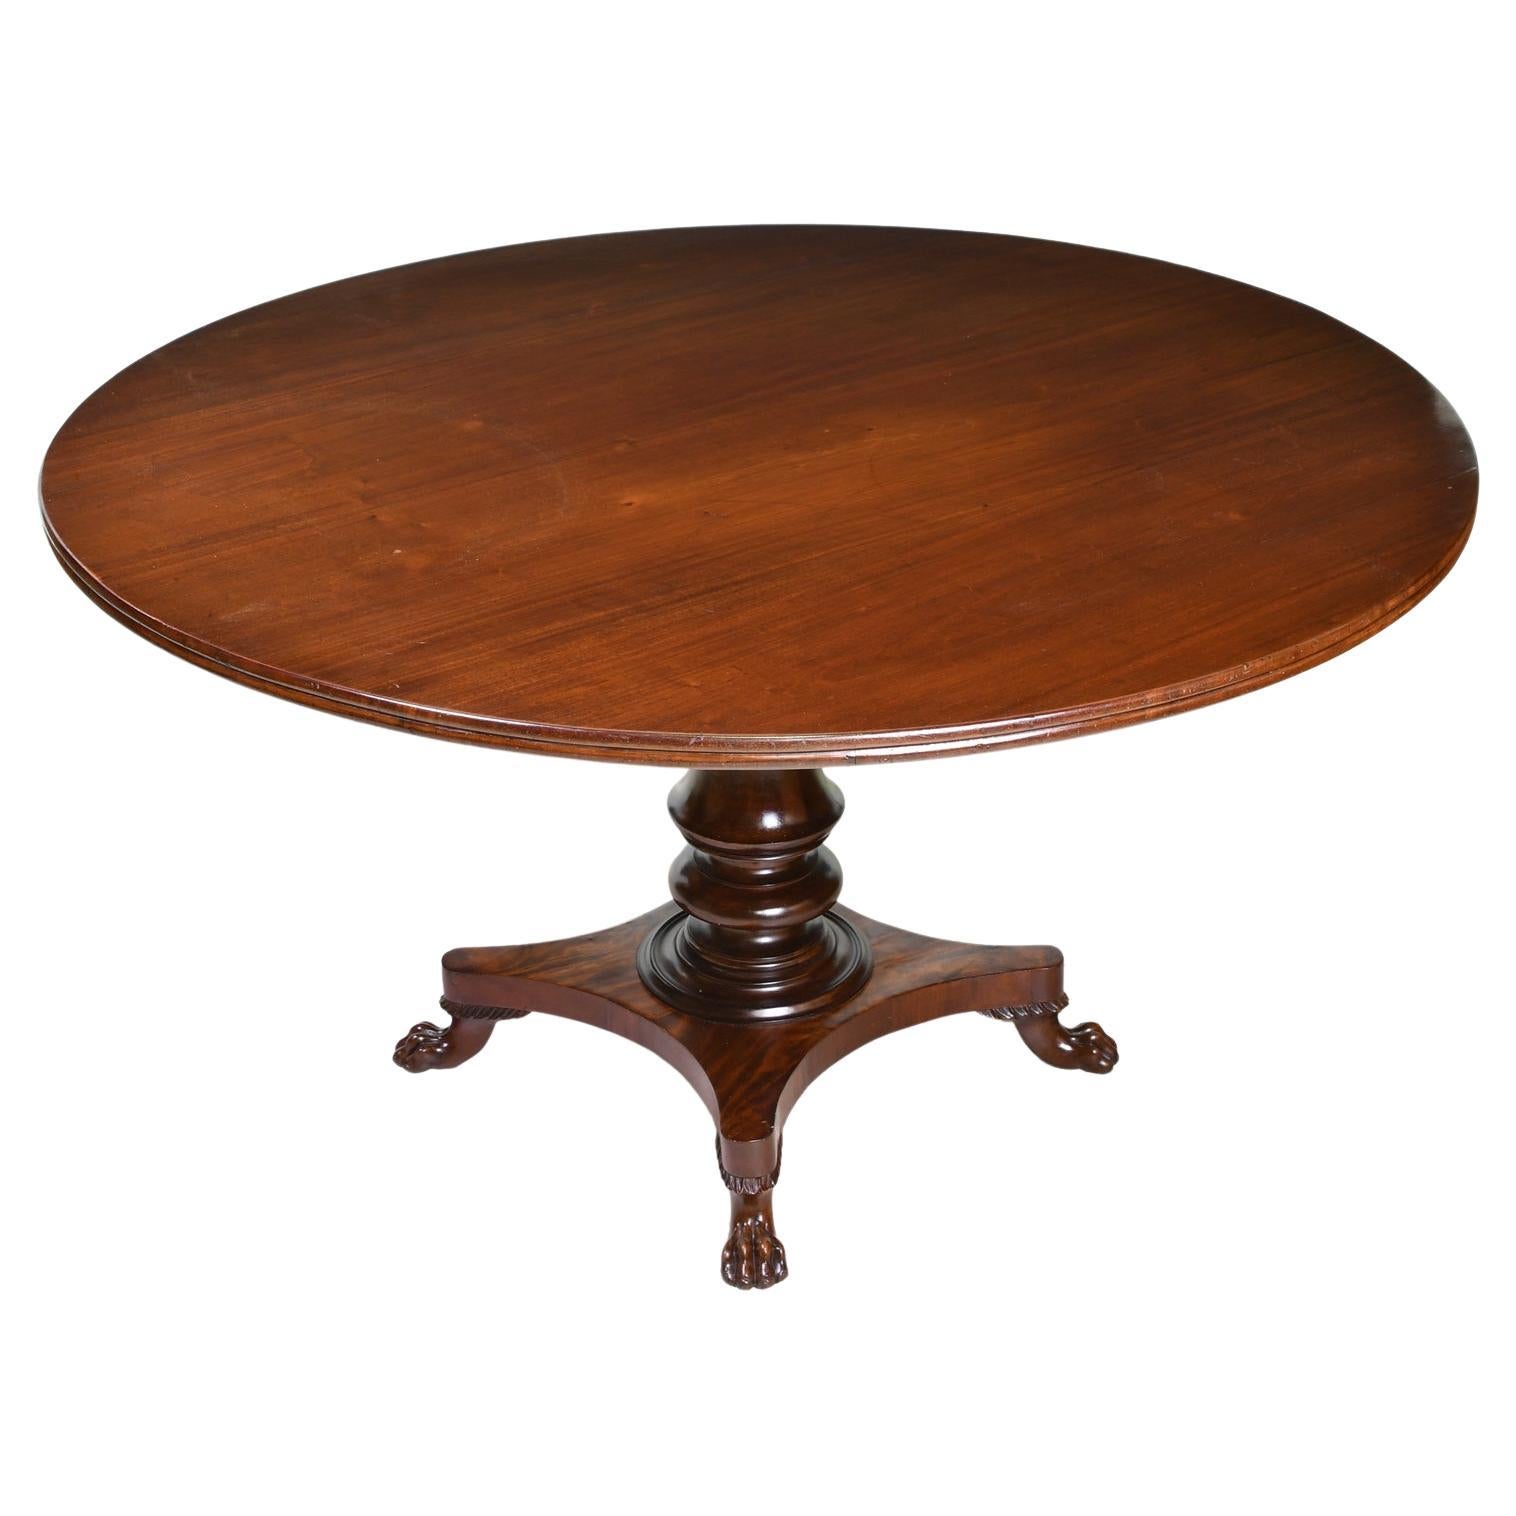 A very beautiful dining table in fine mahogany with round top supported on a turned column that rests on a quatre-form base with carved lion's paw feet. While the base dates to the reign of Christian VIII of Denmark, circa 1835, the round top which